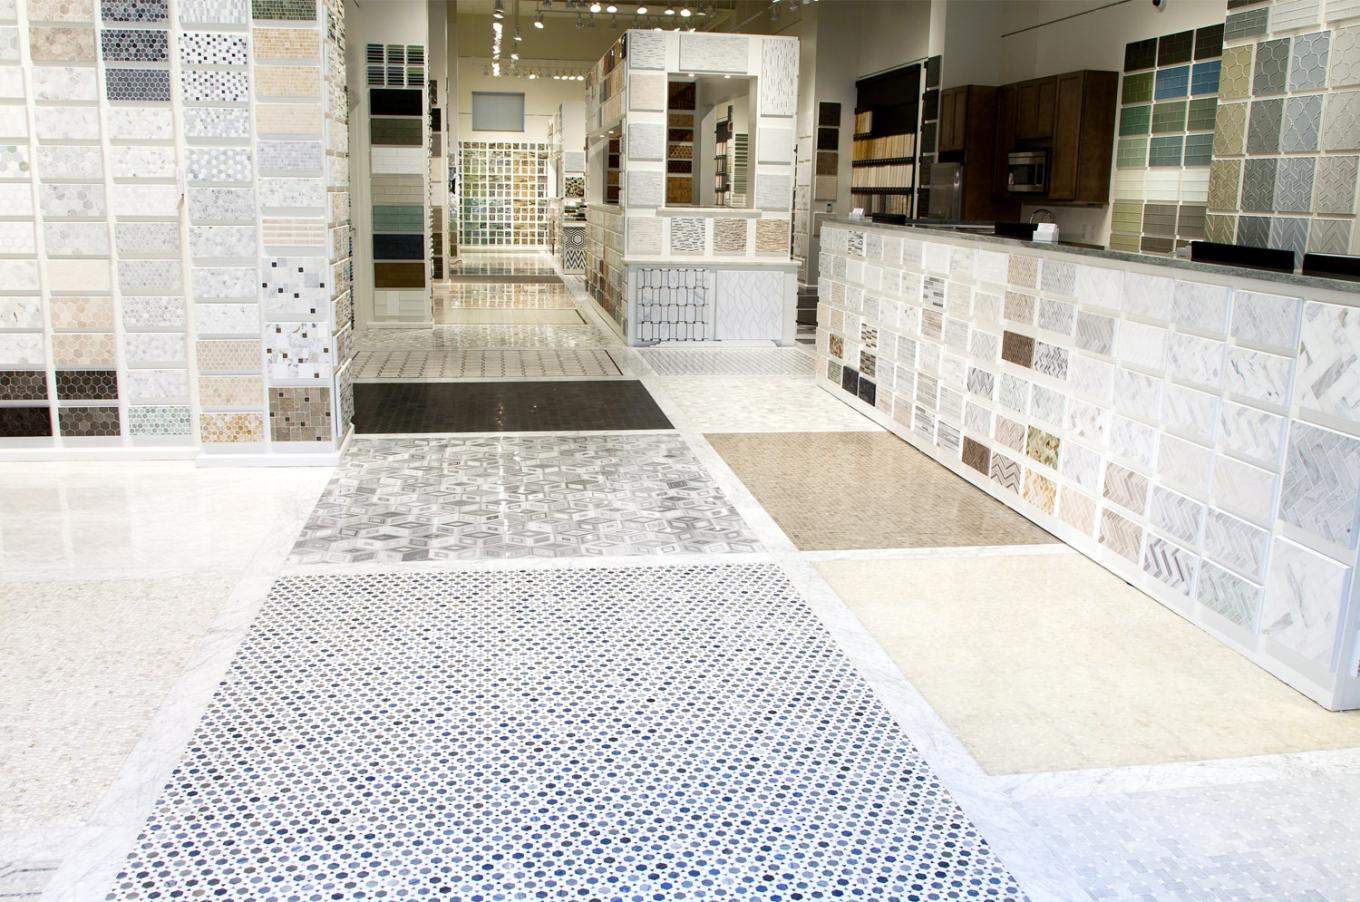 A view of the Complete Tile Collection New Jersey Showroom from the main entrance.